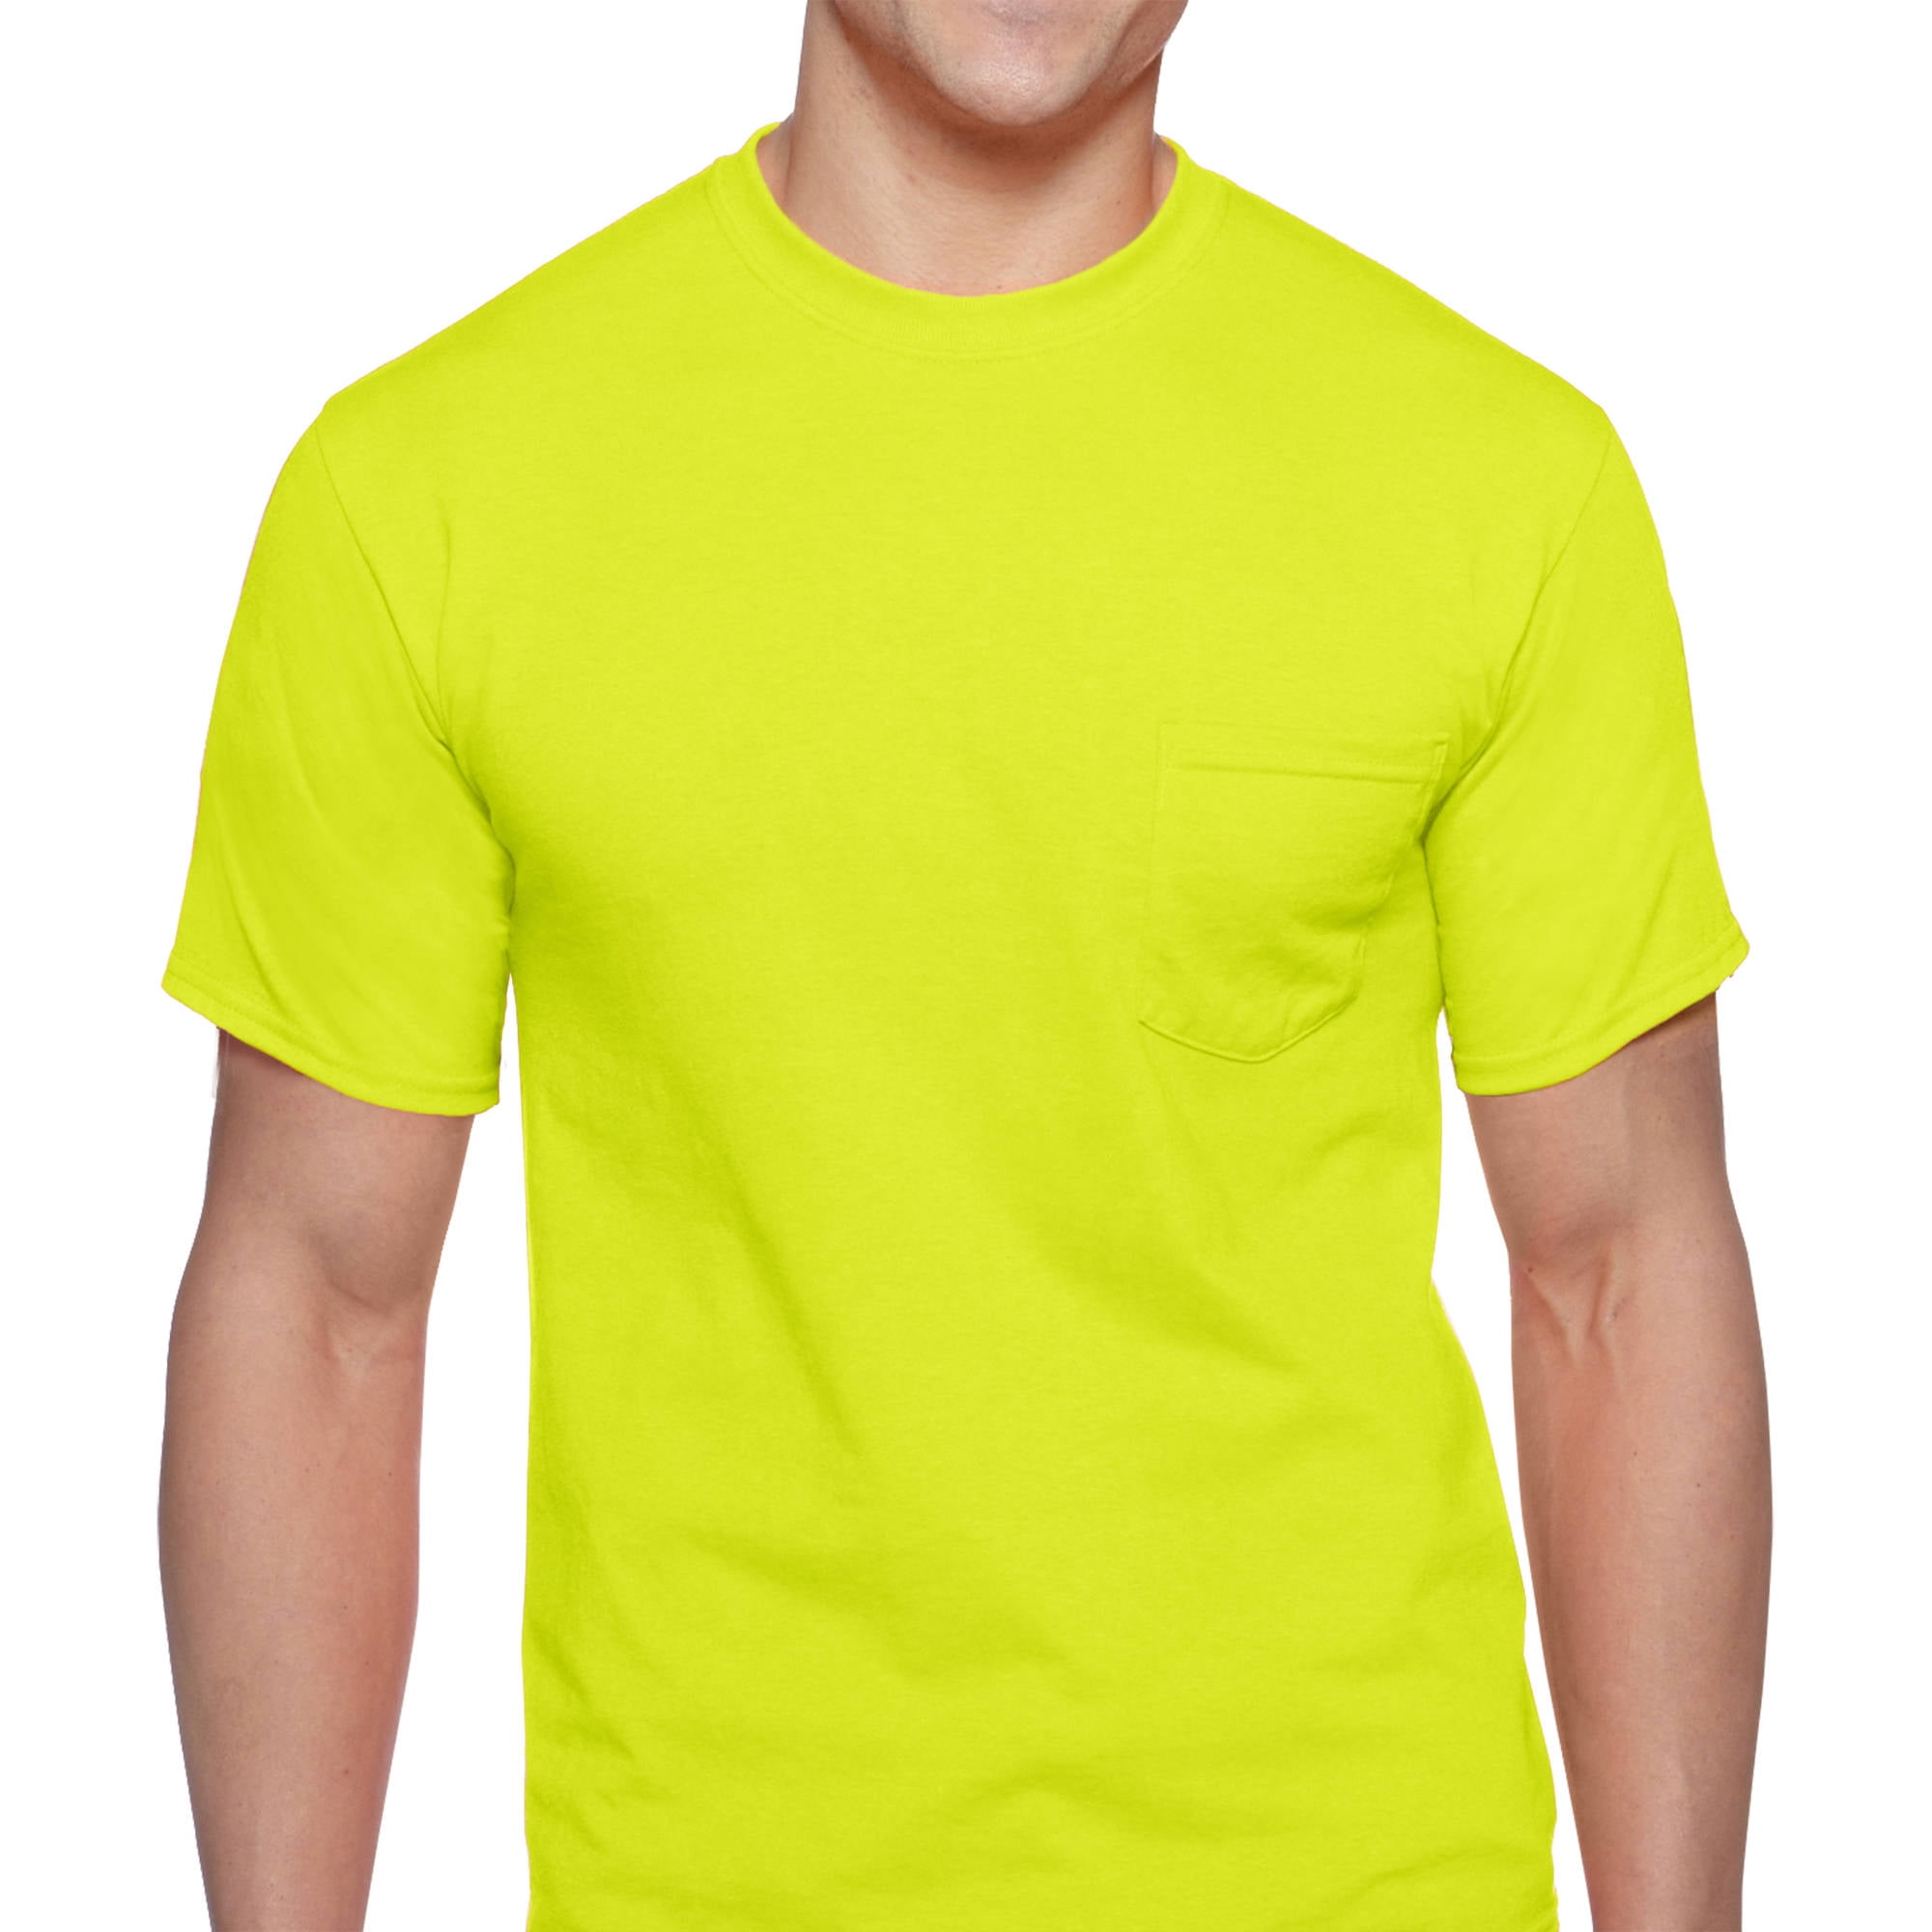 S, Hi Vis Tee Shirt Yellow Silver® Hi Vis Viz Round Crew Neck Short Sleeve T-Shirt Men High Visibility Work Safety Security Reflective Two Tone Breathable Workwear Top